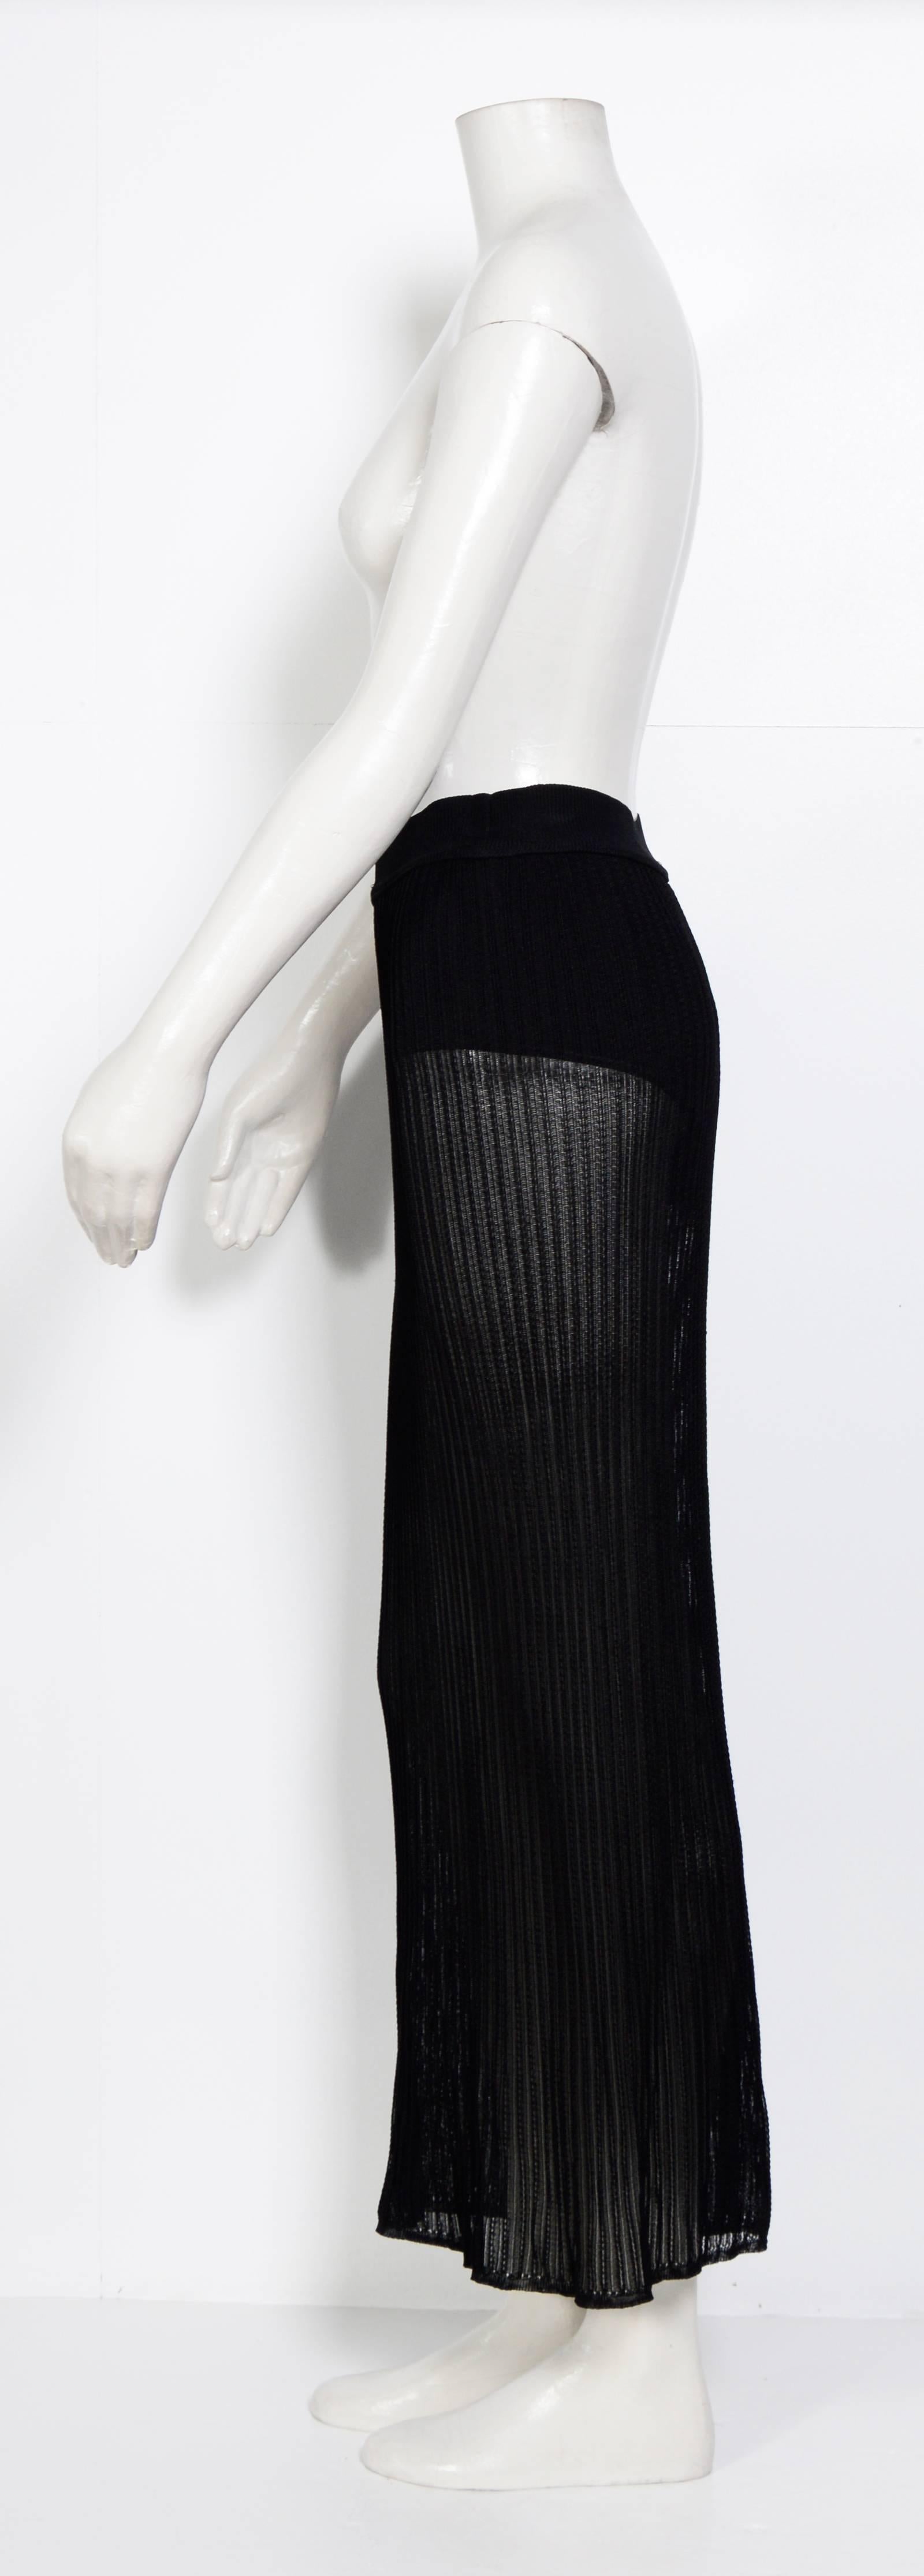 1980s ALAIA Black Knit See-Through Sexy Skirt / Attached Interior Culotte  In Excellent Condition For Sale In Antwerp, BE